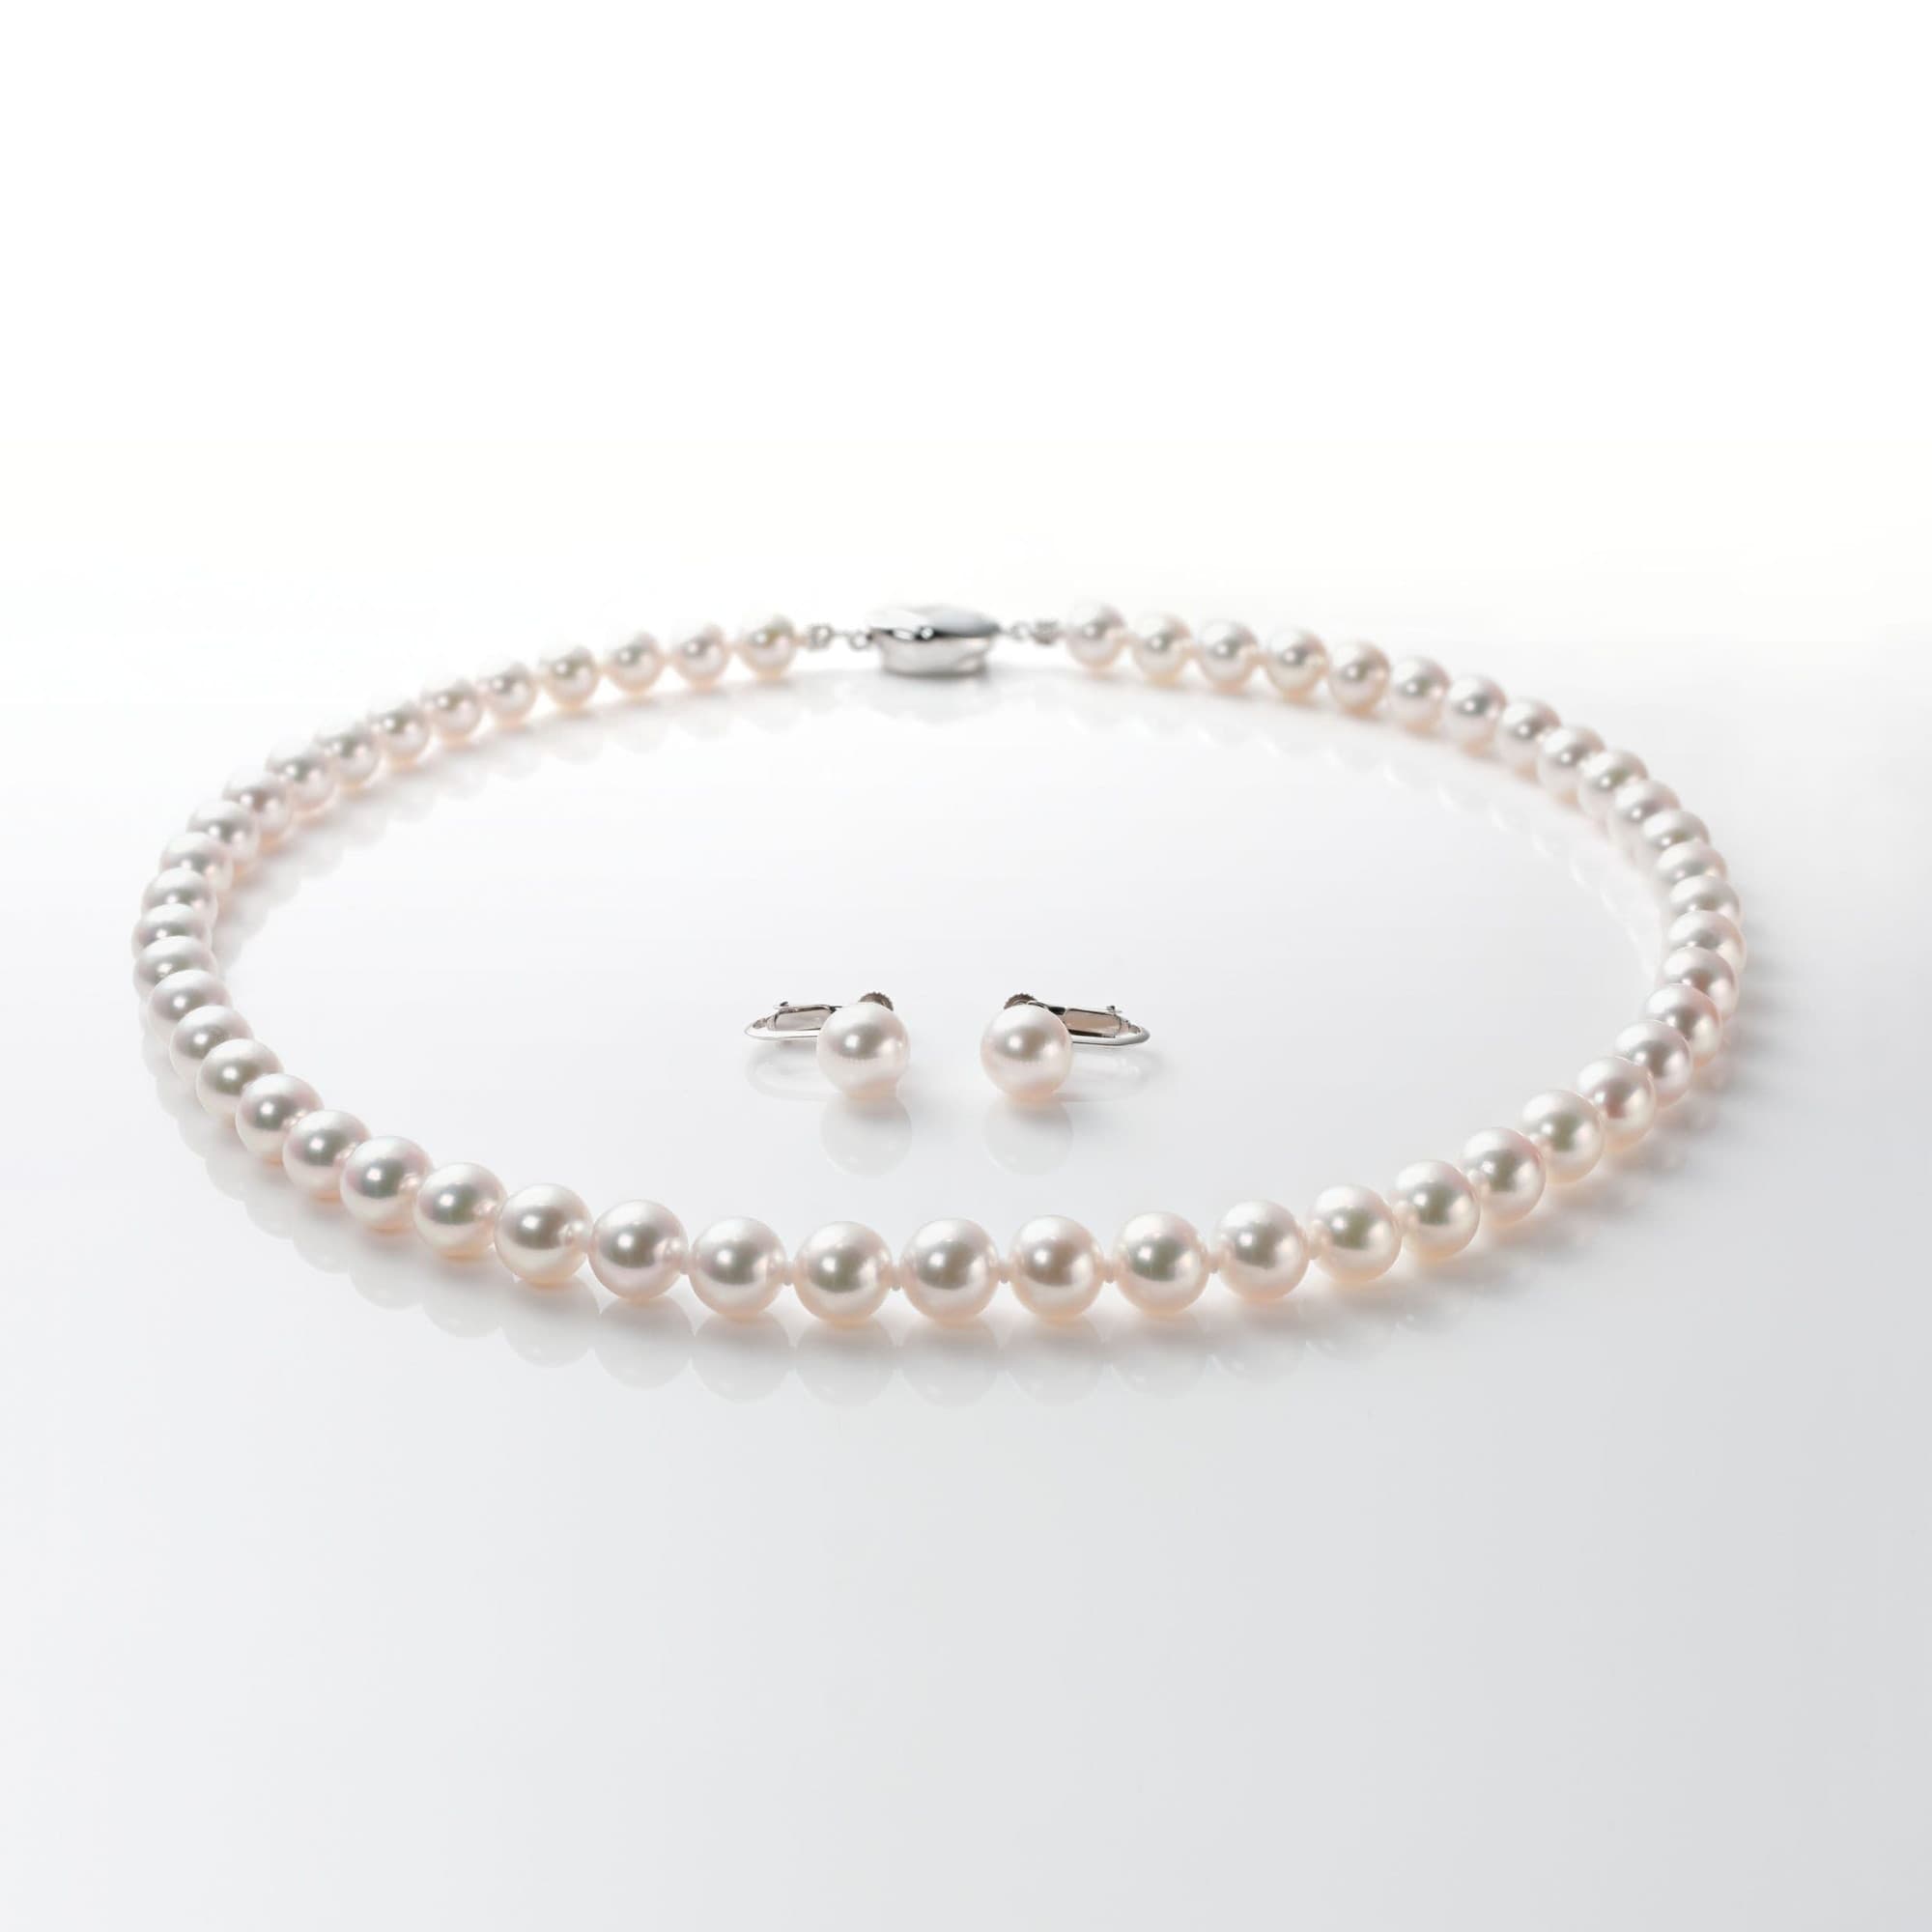 Akoya pearl necklace & pearl earrings set【L】/アコヤ真珠ネックレス＆イヤリングセット Mサイズ-1